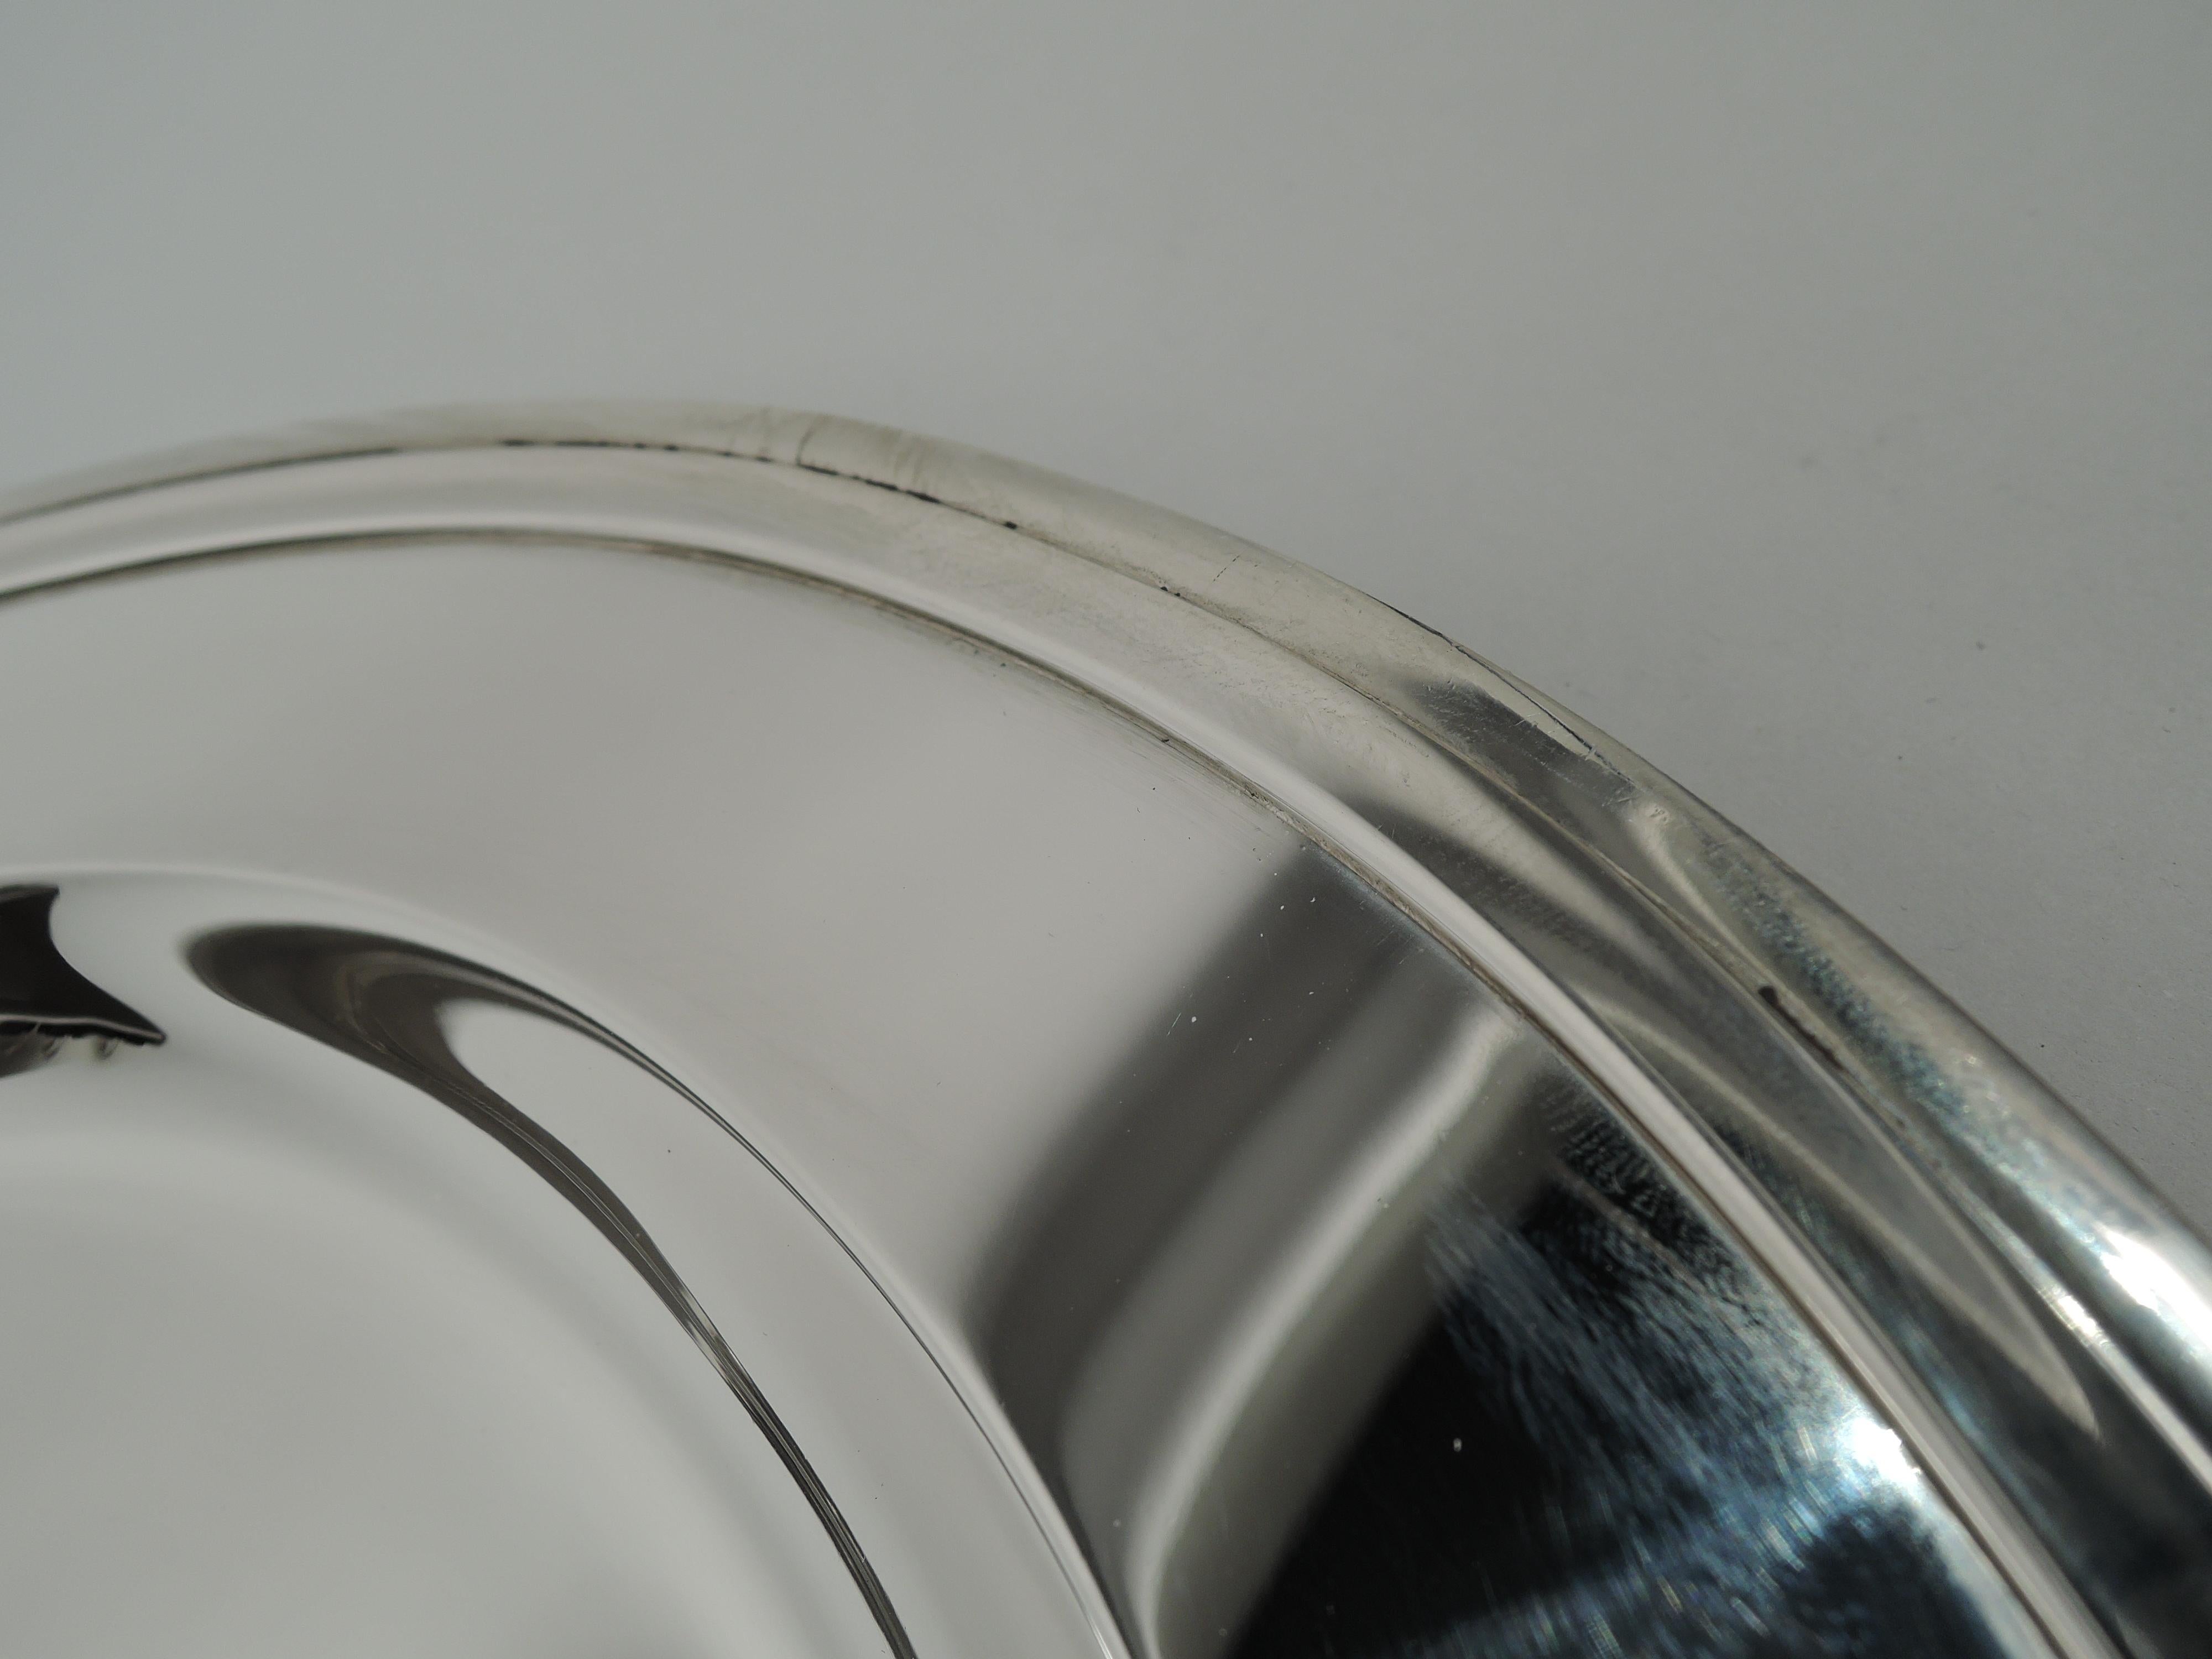 Large and Modern sterling silver serving tray. Made by Tiffany & Co. in New York, ca 1923. Oval with deep well, wide shoulder, and molded rim. Fully marked including maker’s stamp, pattern no. 20182 (first produced in 1923), and director’s letter m.